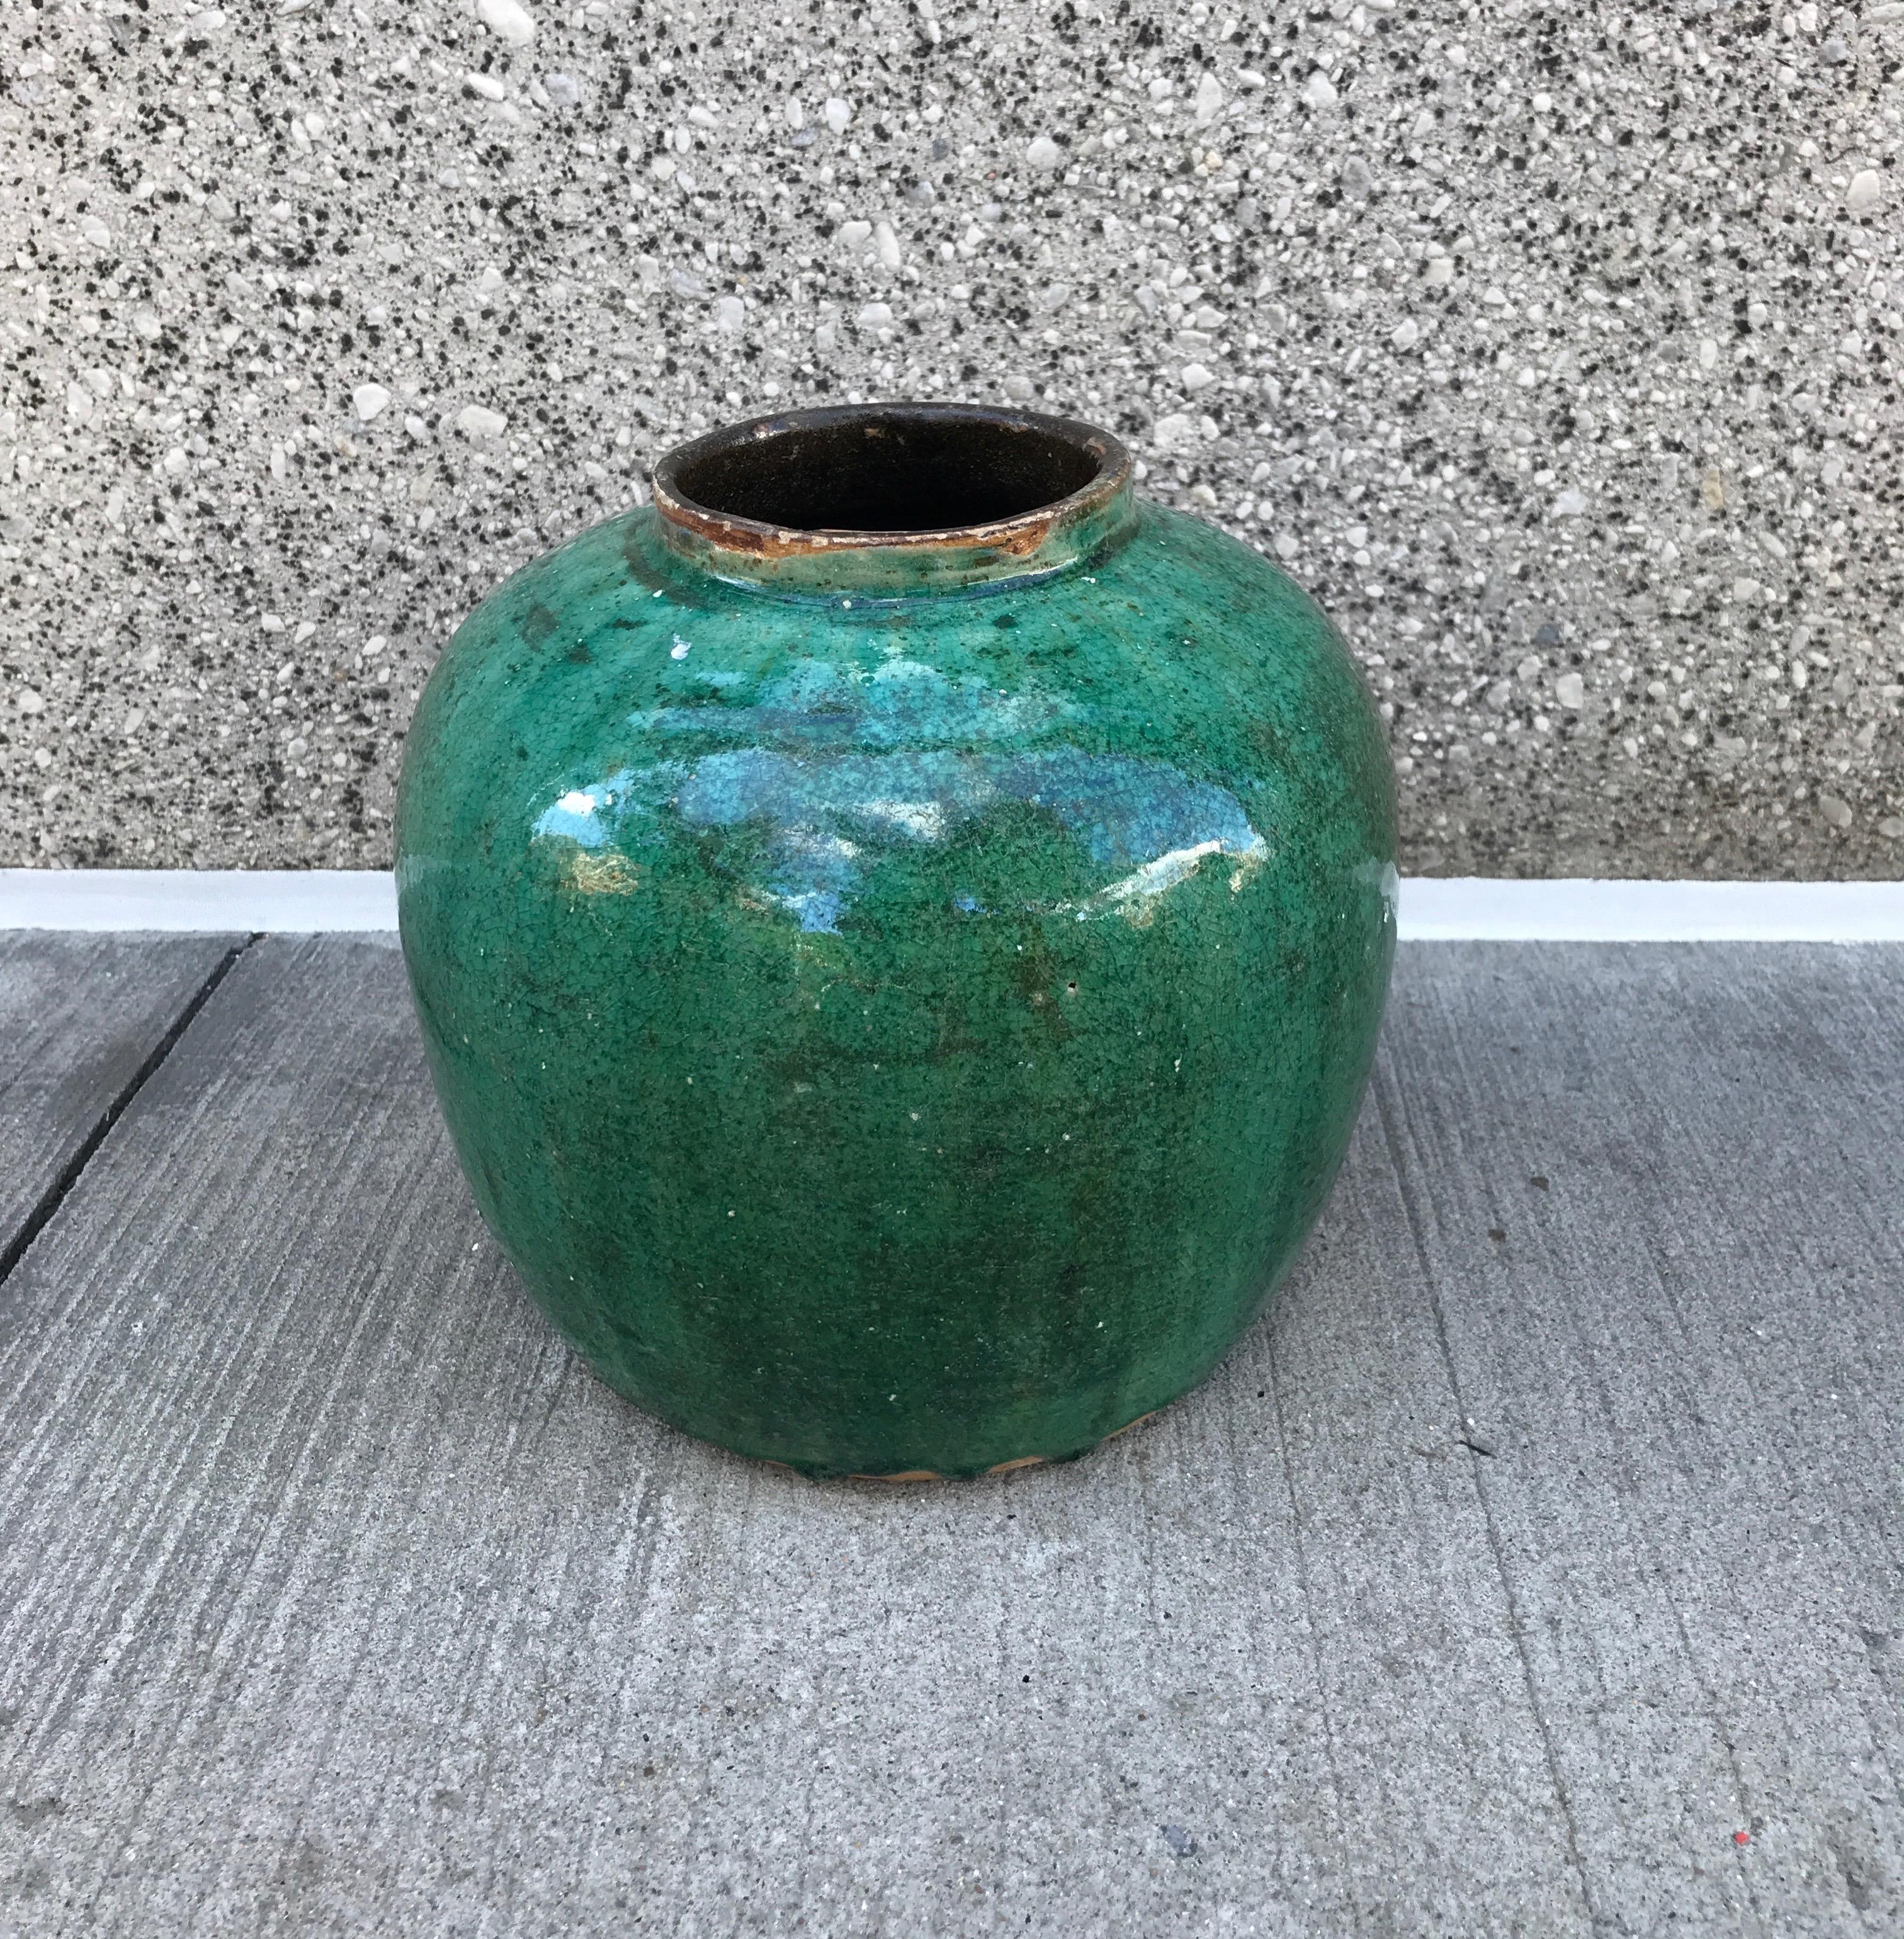 A classically shaped and beautifully glazed dark green antique Chinese ceramic ginger jar. A colorful addition to any room. Hunan Province, circa 1880.
CR749.